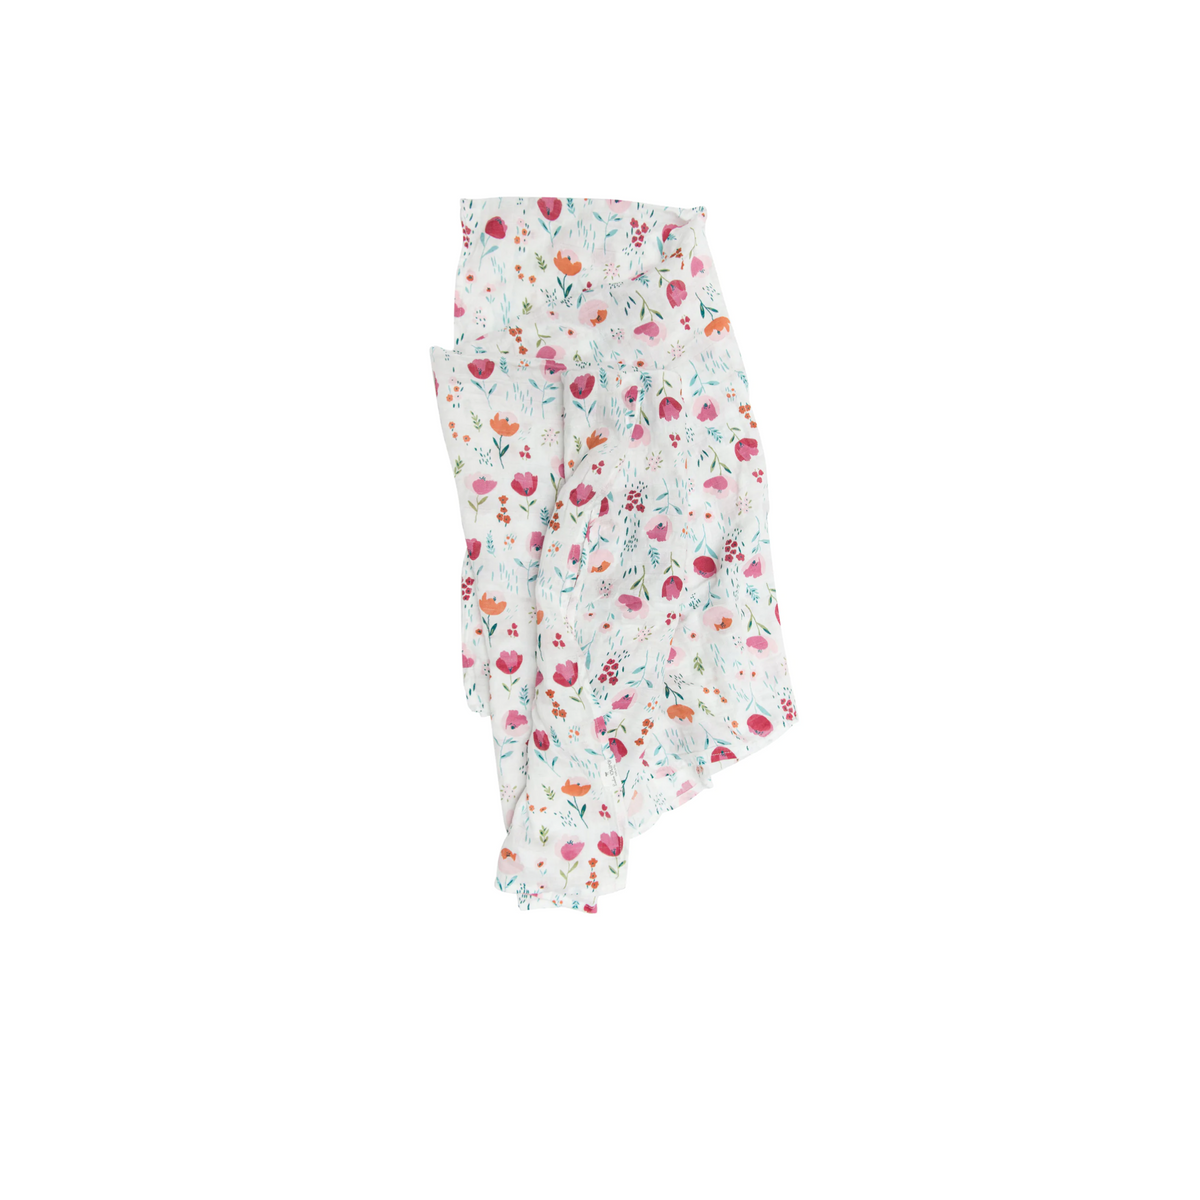 Rosey Bloom Swaddle